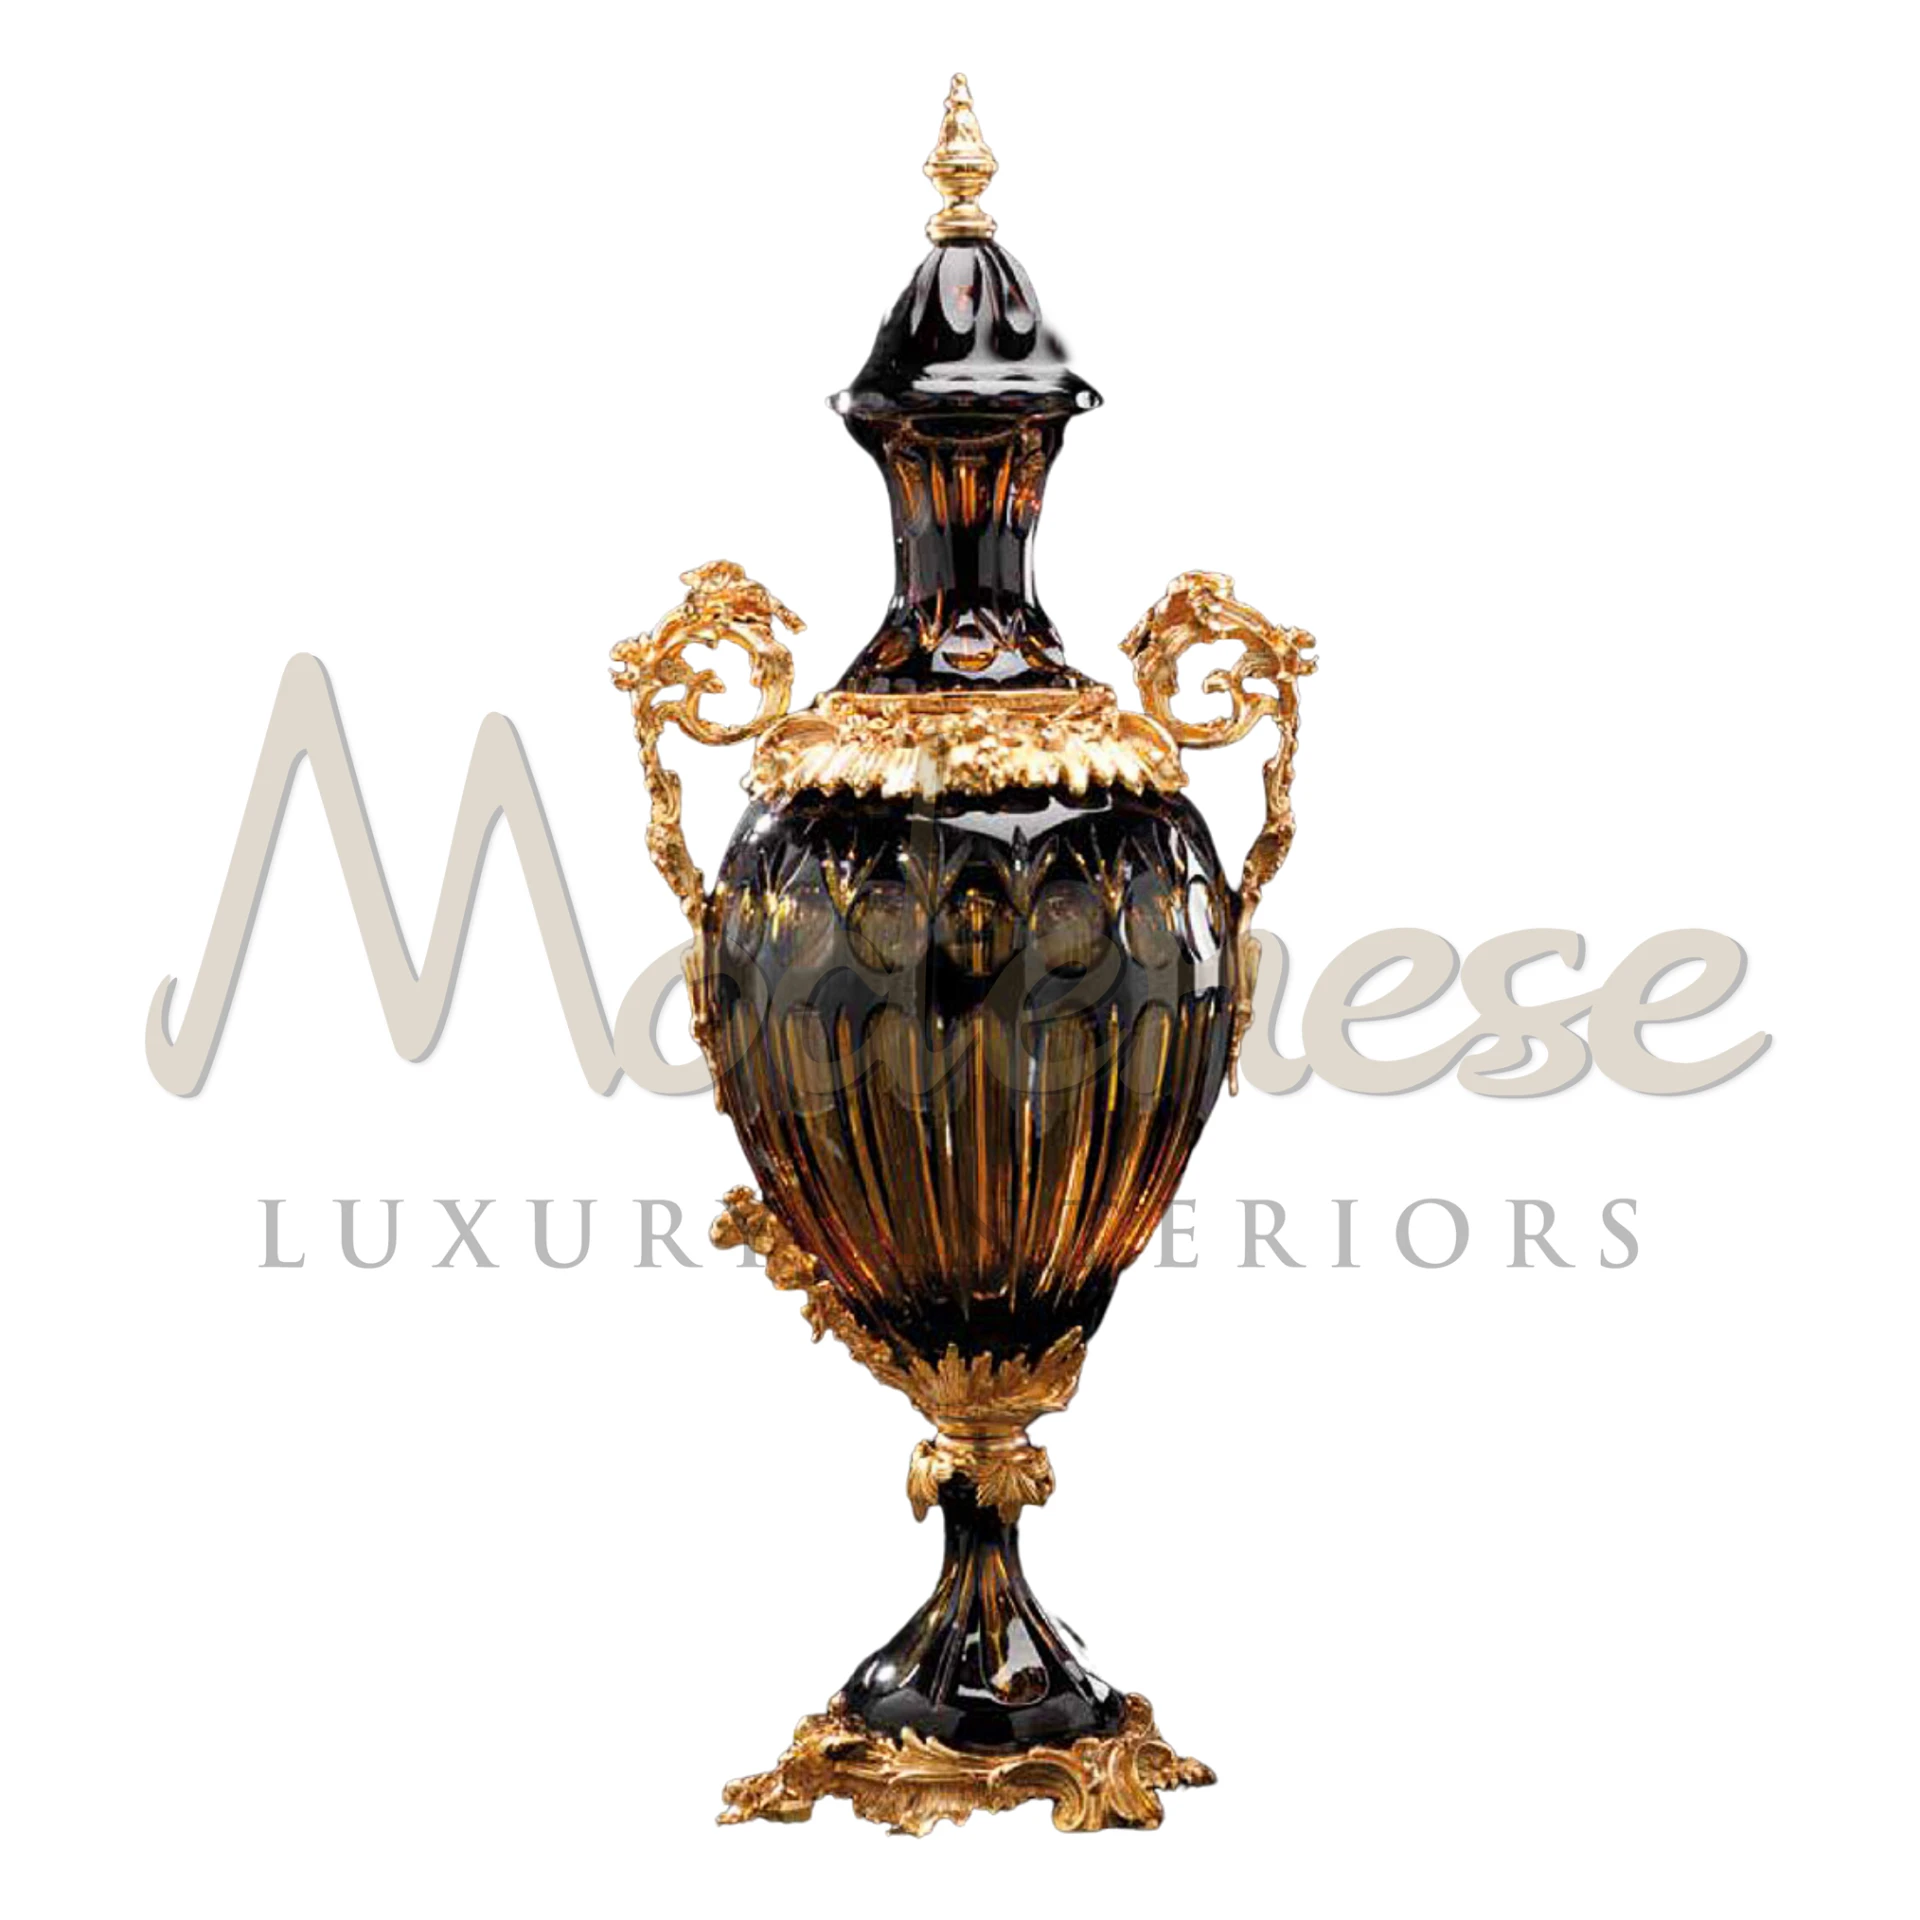 Classical Dark Glass Amphora, echoing ancient elegance in dark glass, perfect for luxury interiors with a traditional touch.